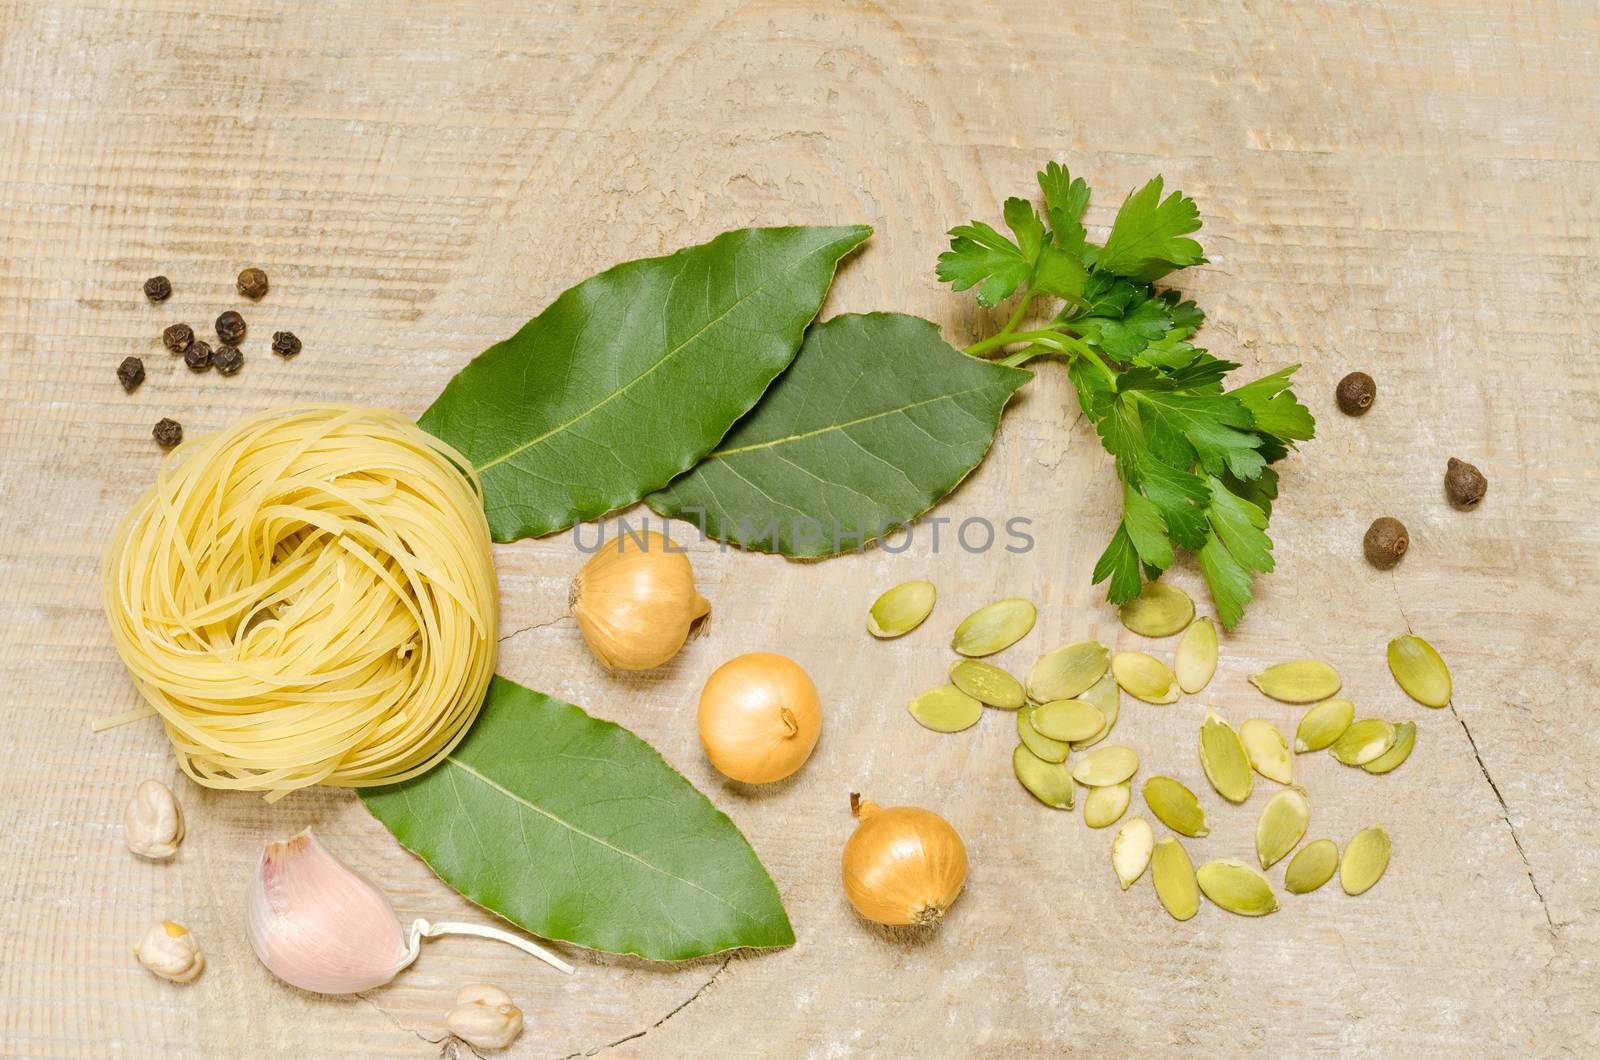 Not the cooked pasta, Bay leaf, onion, garlic and other spices on the old wooden background